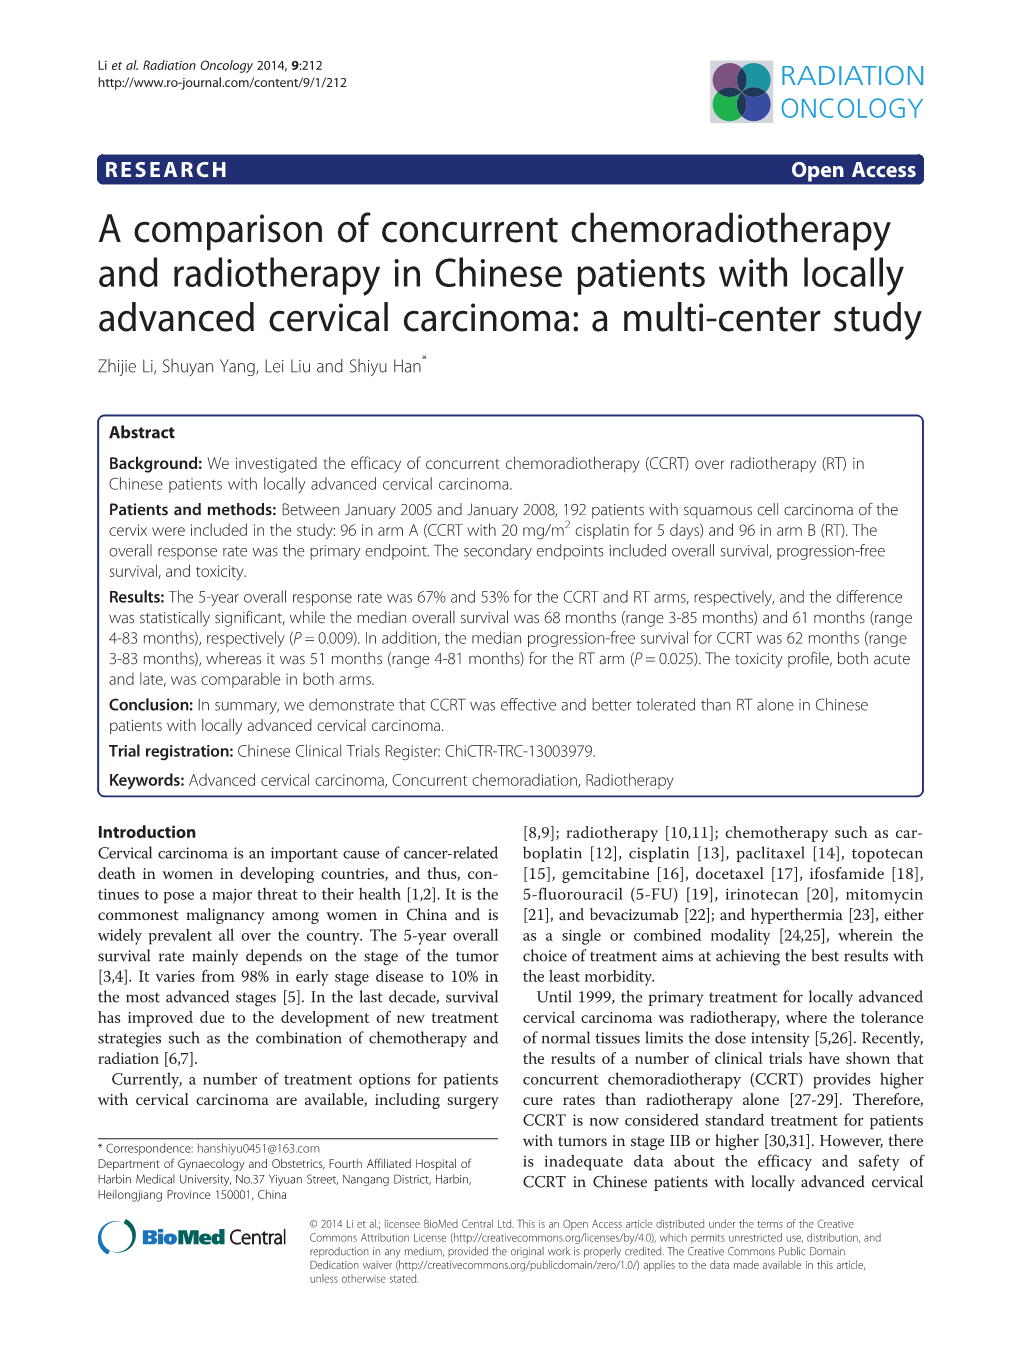 A Comparison of Concurrent Chemoradiotherapy And